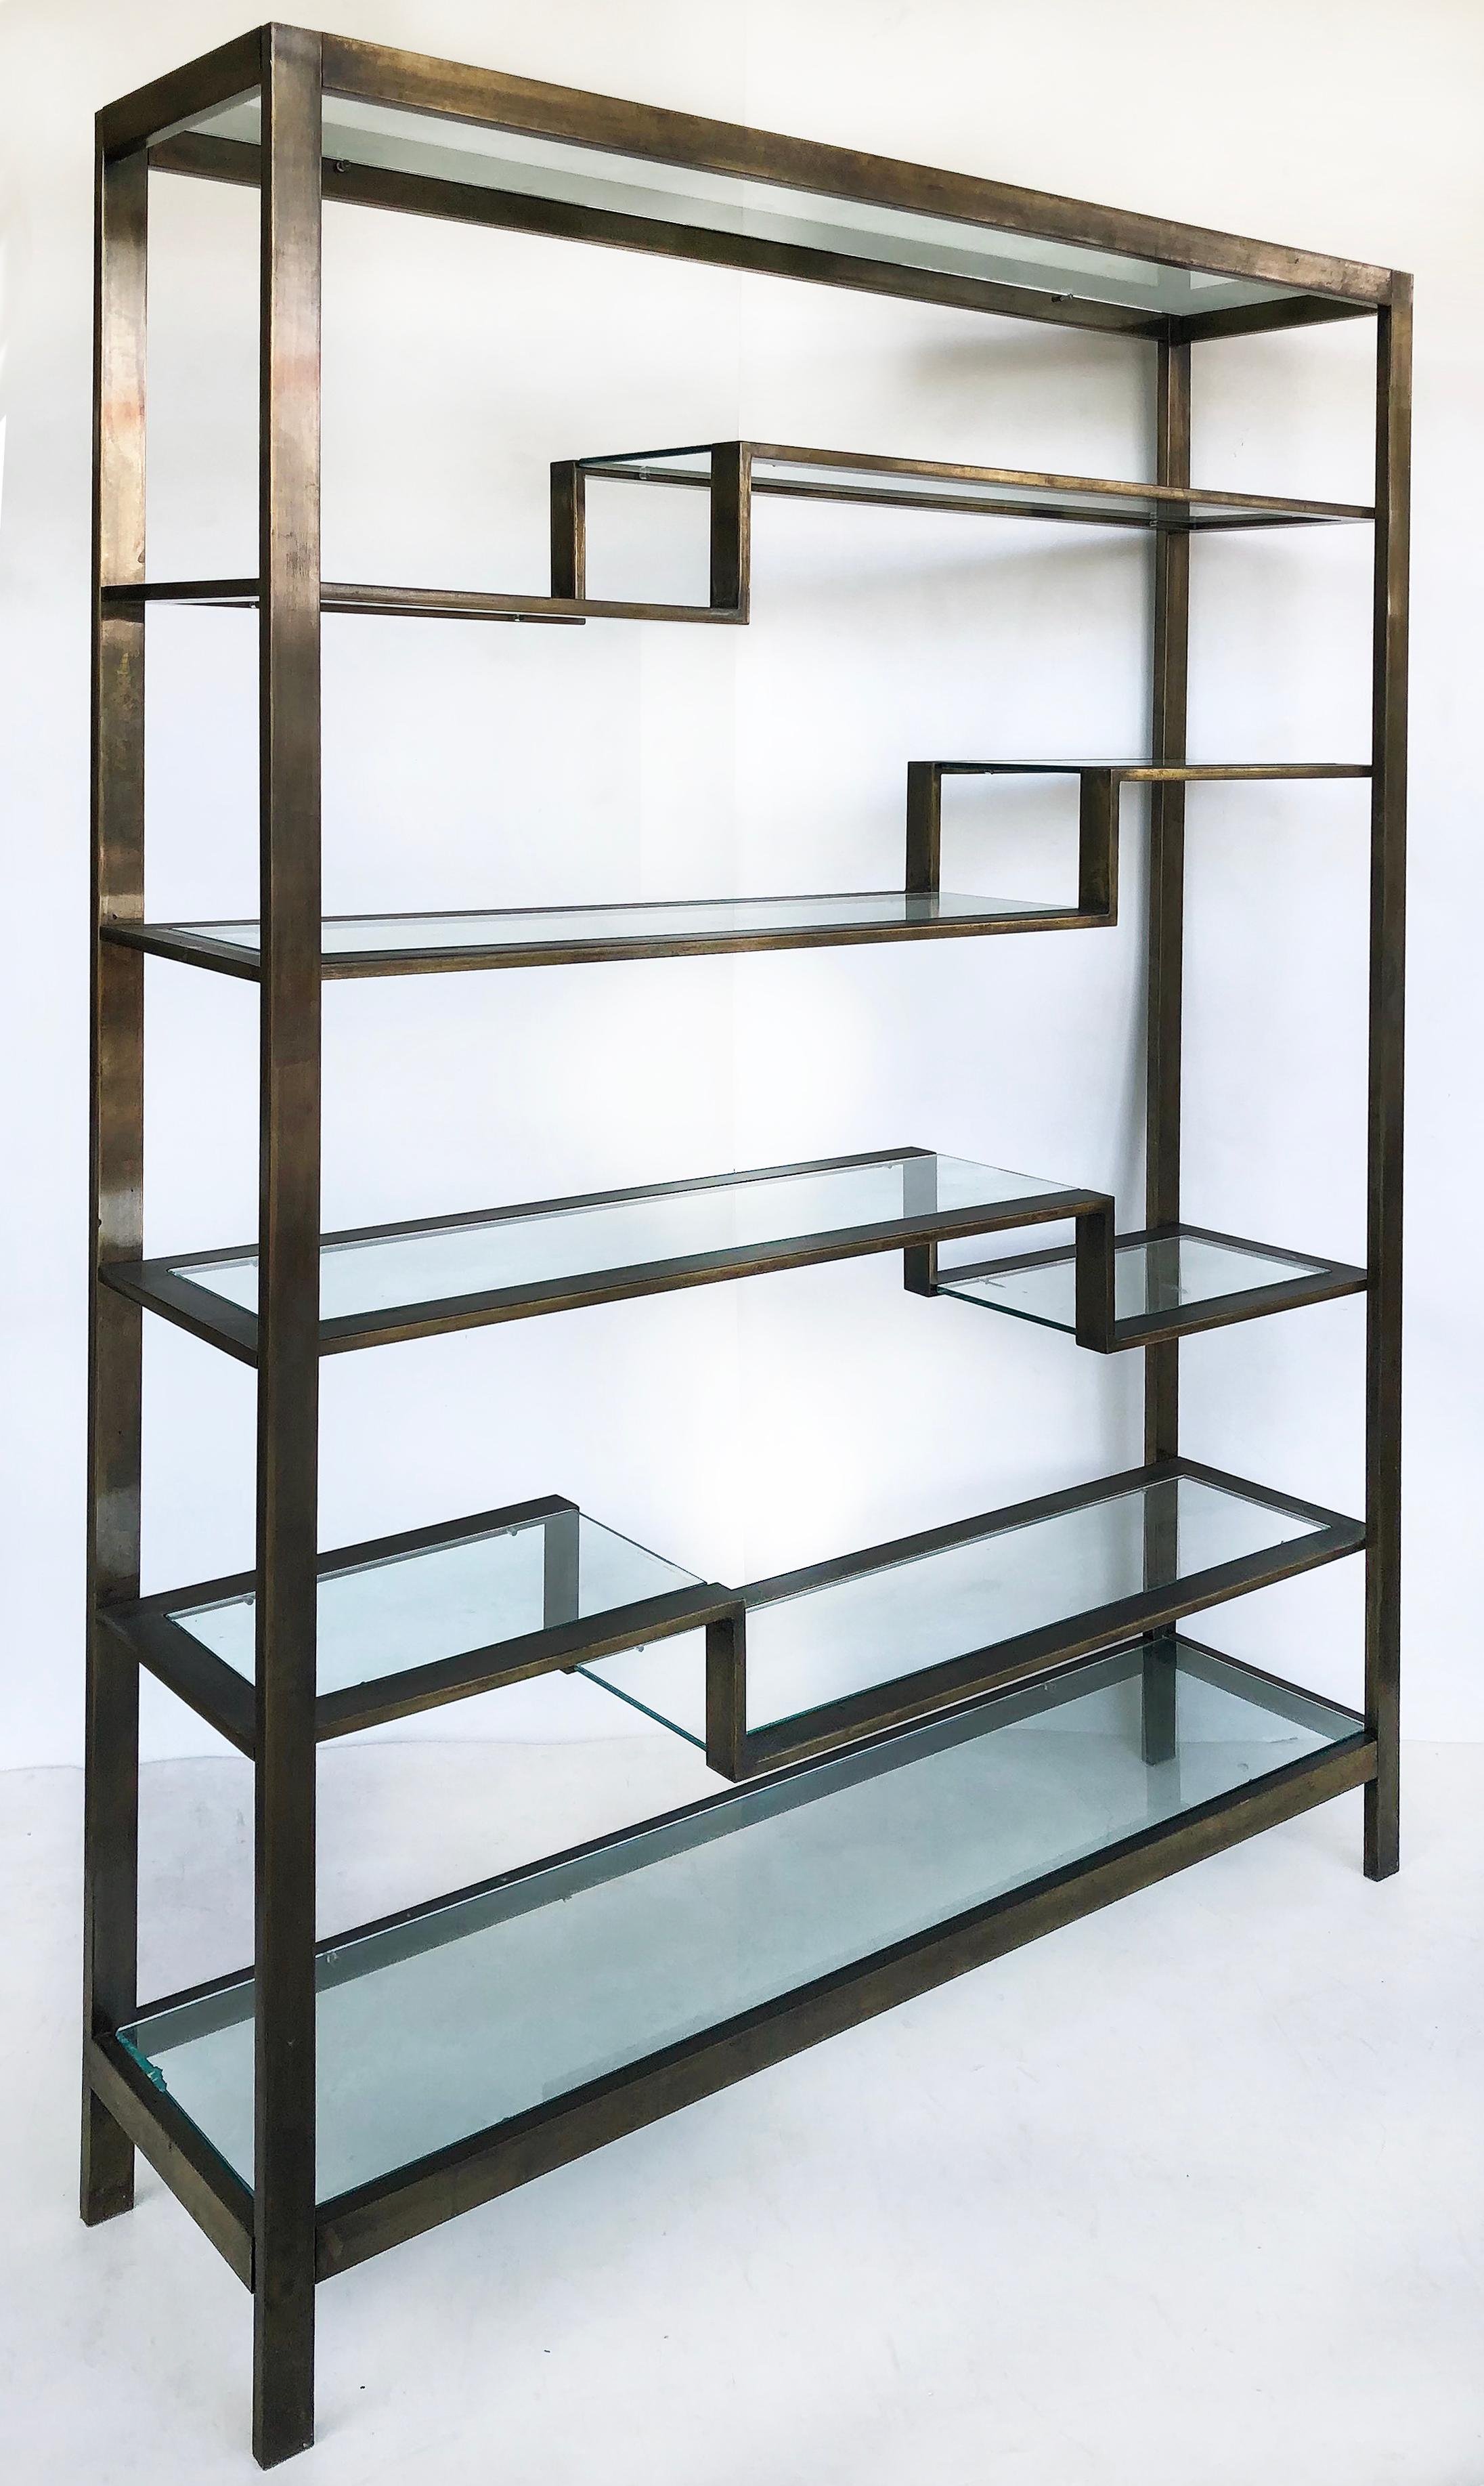 Bronzed Finish Mid-Century Modern etagere metal shelving with glass shelves

Offered for sale is a Mid-Century Modern etagere created in a bronze finish with 4 central staggered angled shelves with glass. The top and base levels have glass shelves